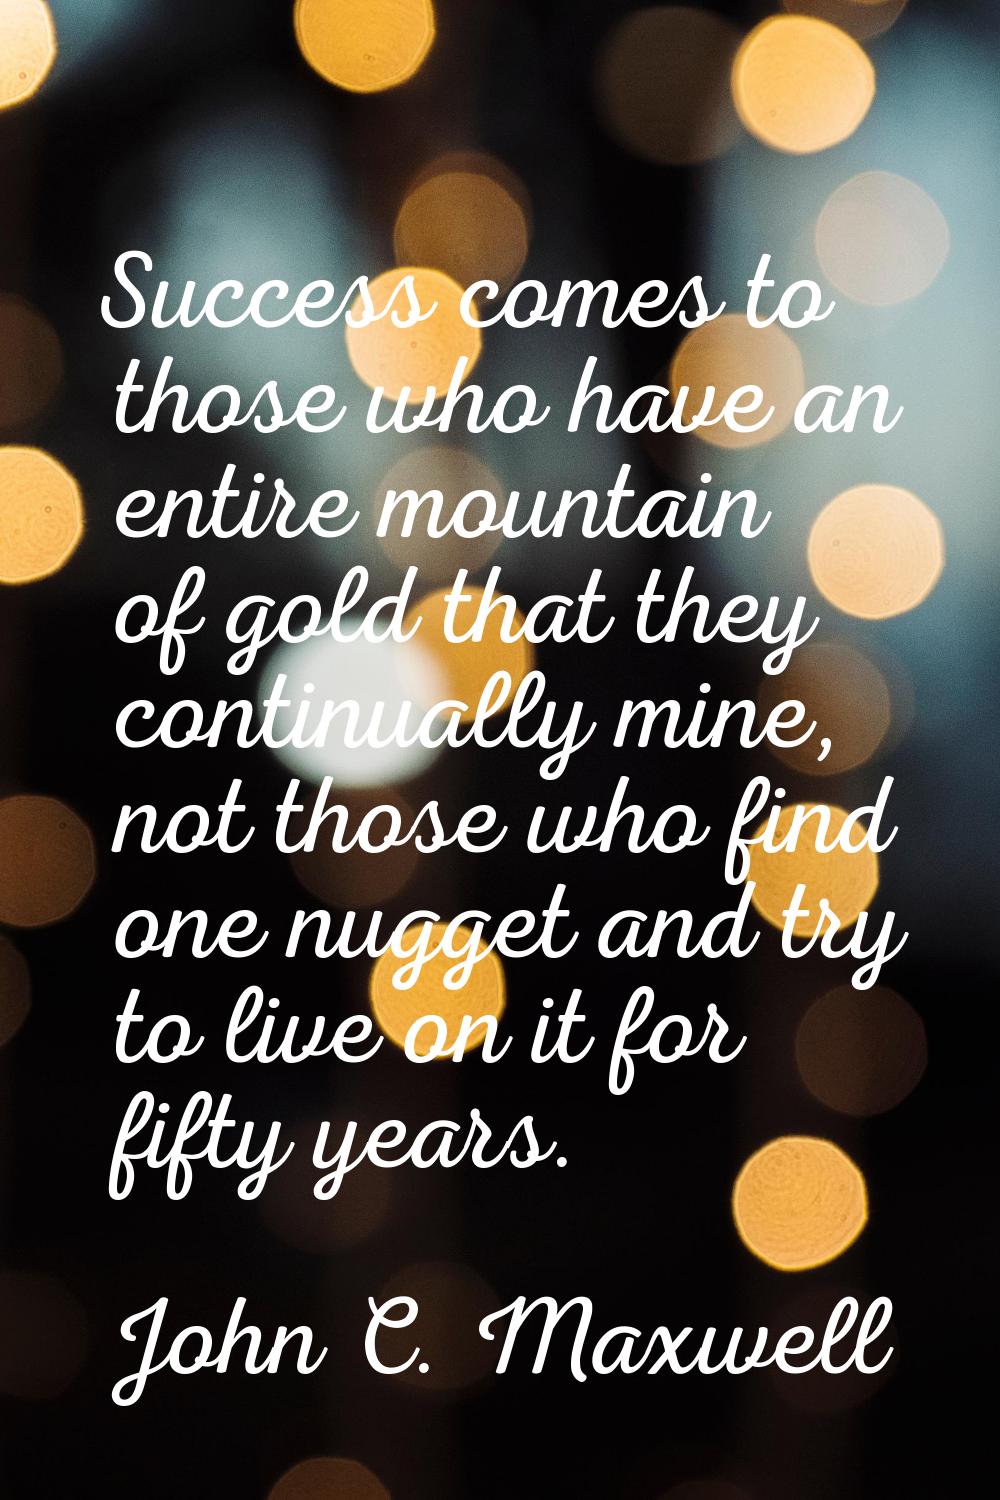 Success comes to those who have an entire mountain of gold that they continually mine, not those wh